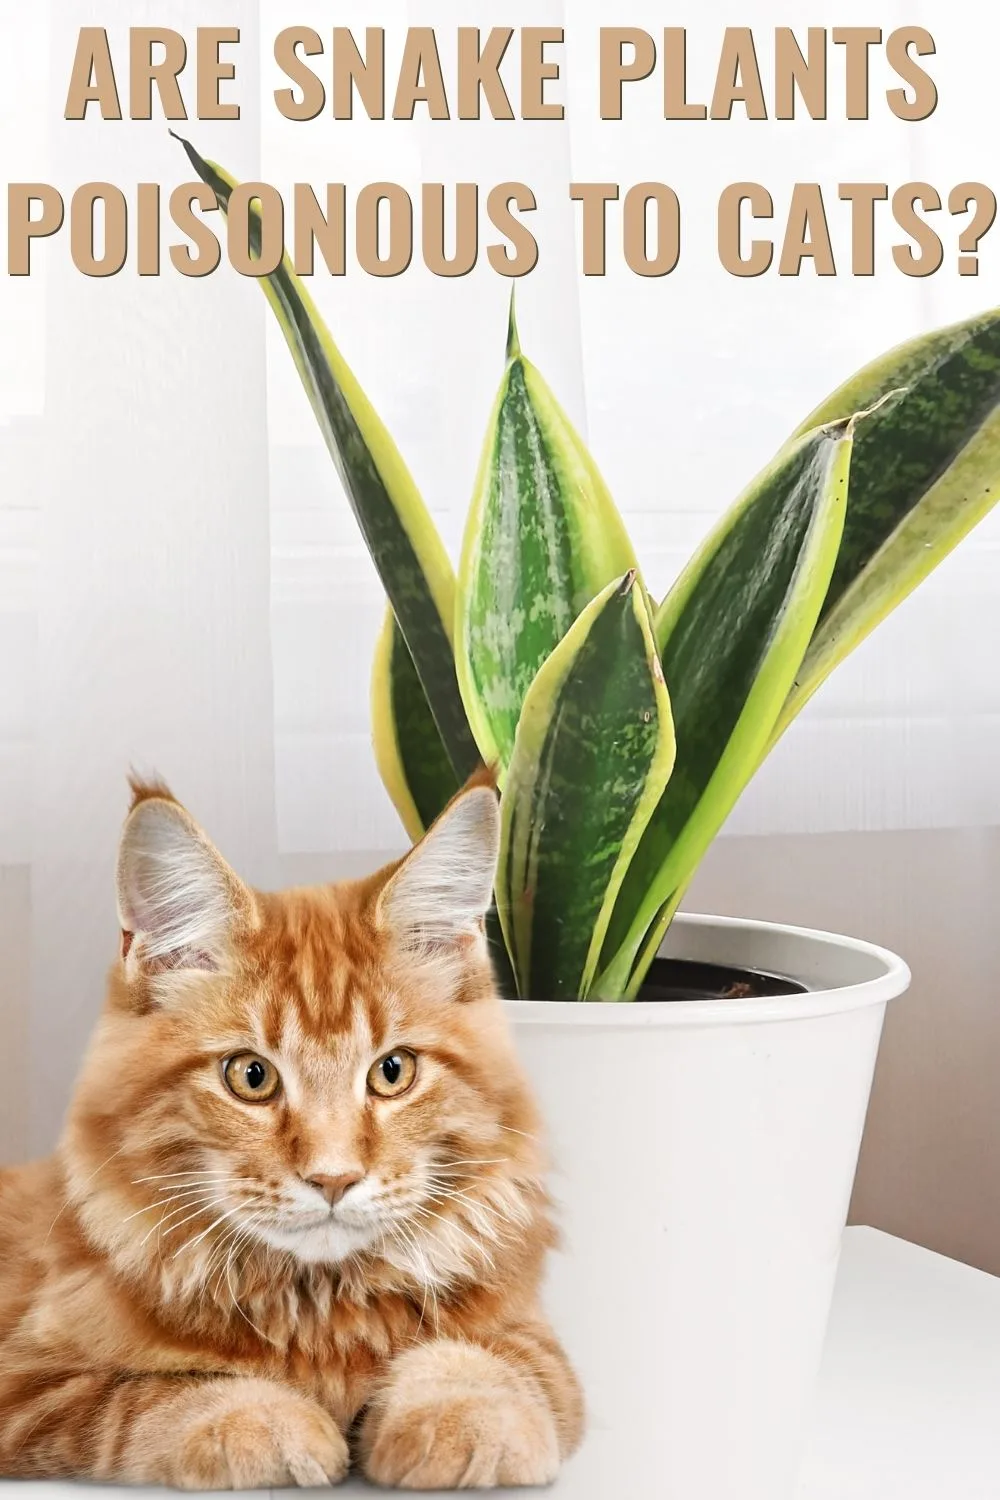 Are snake plants poisonous to cats?